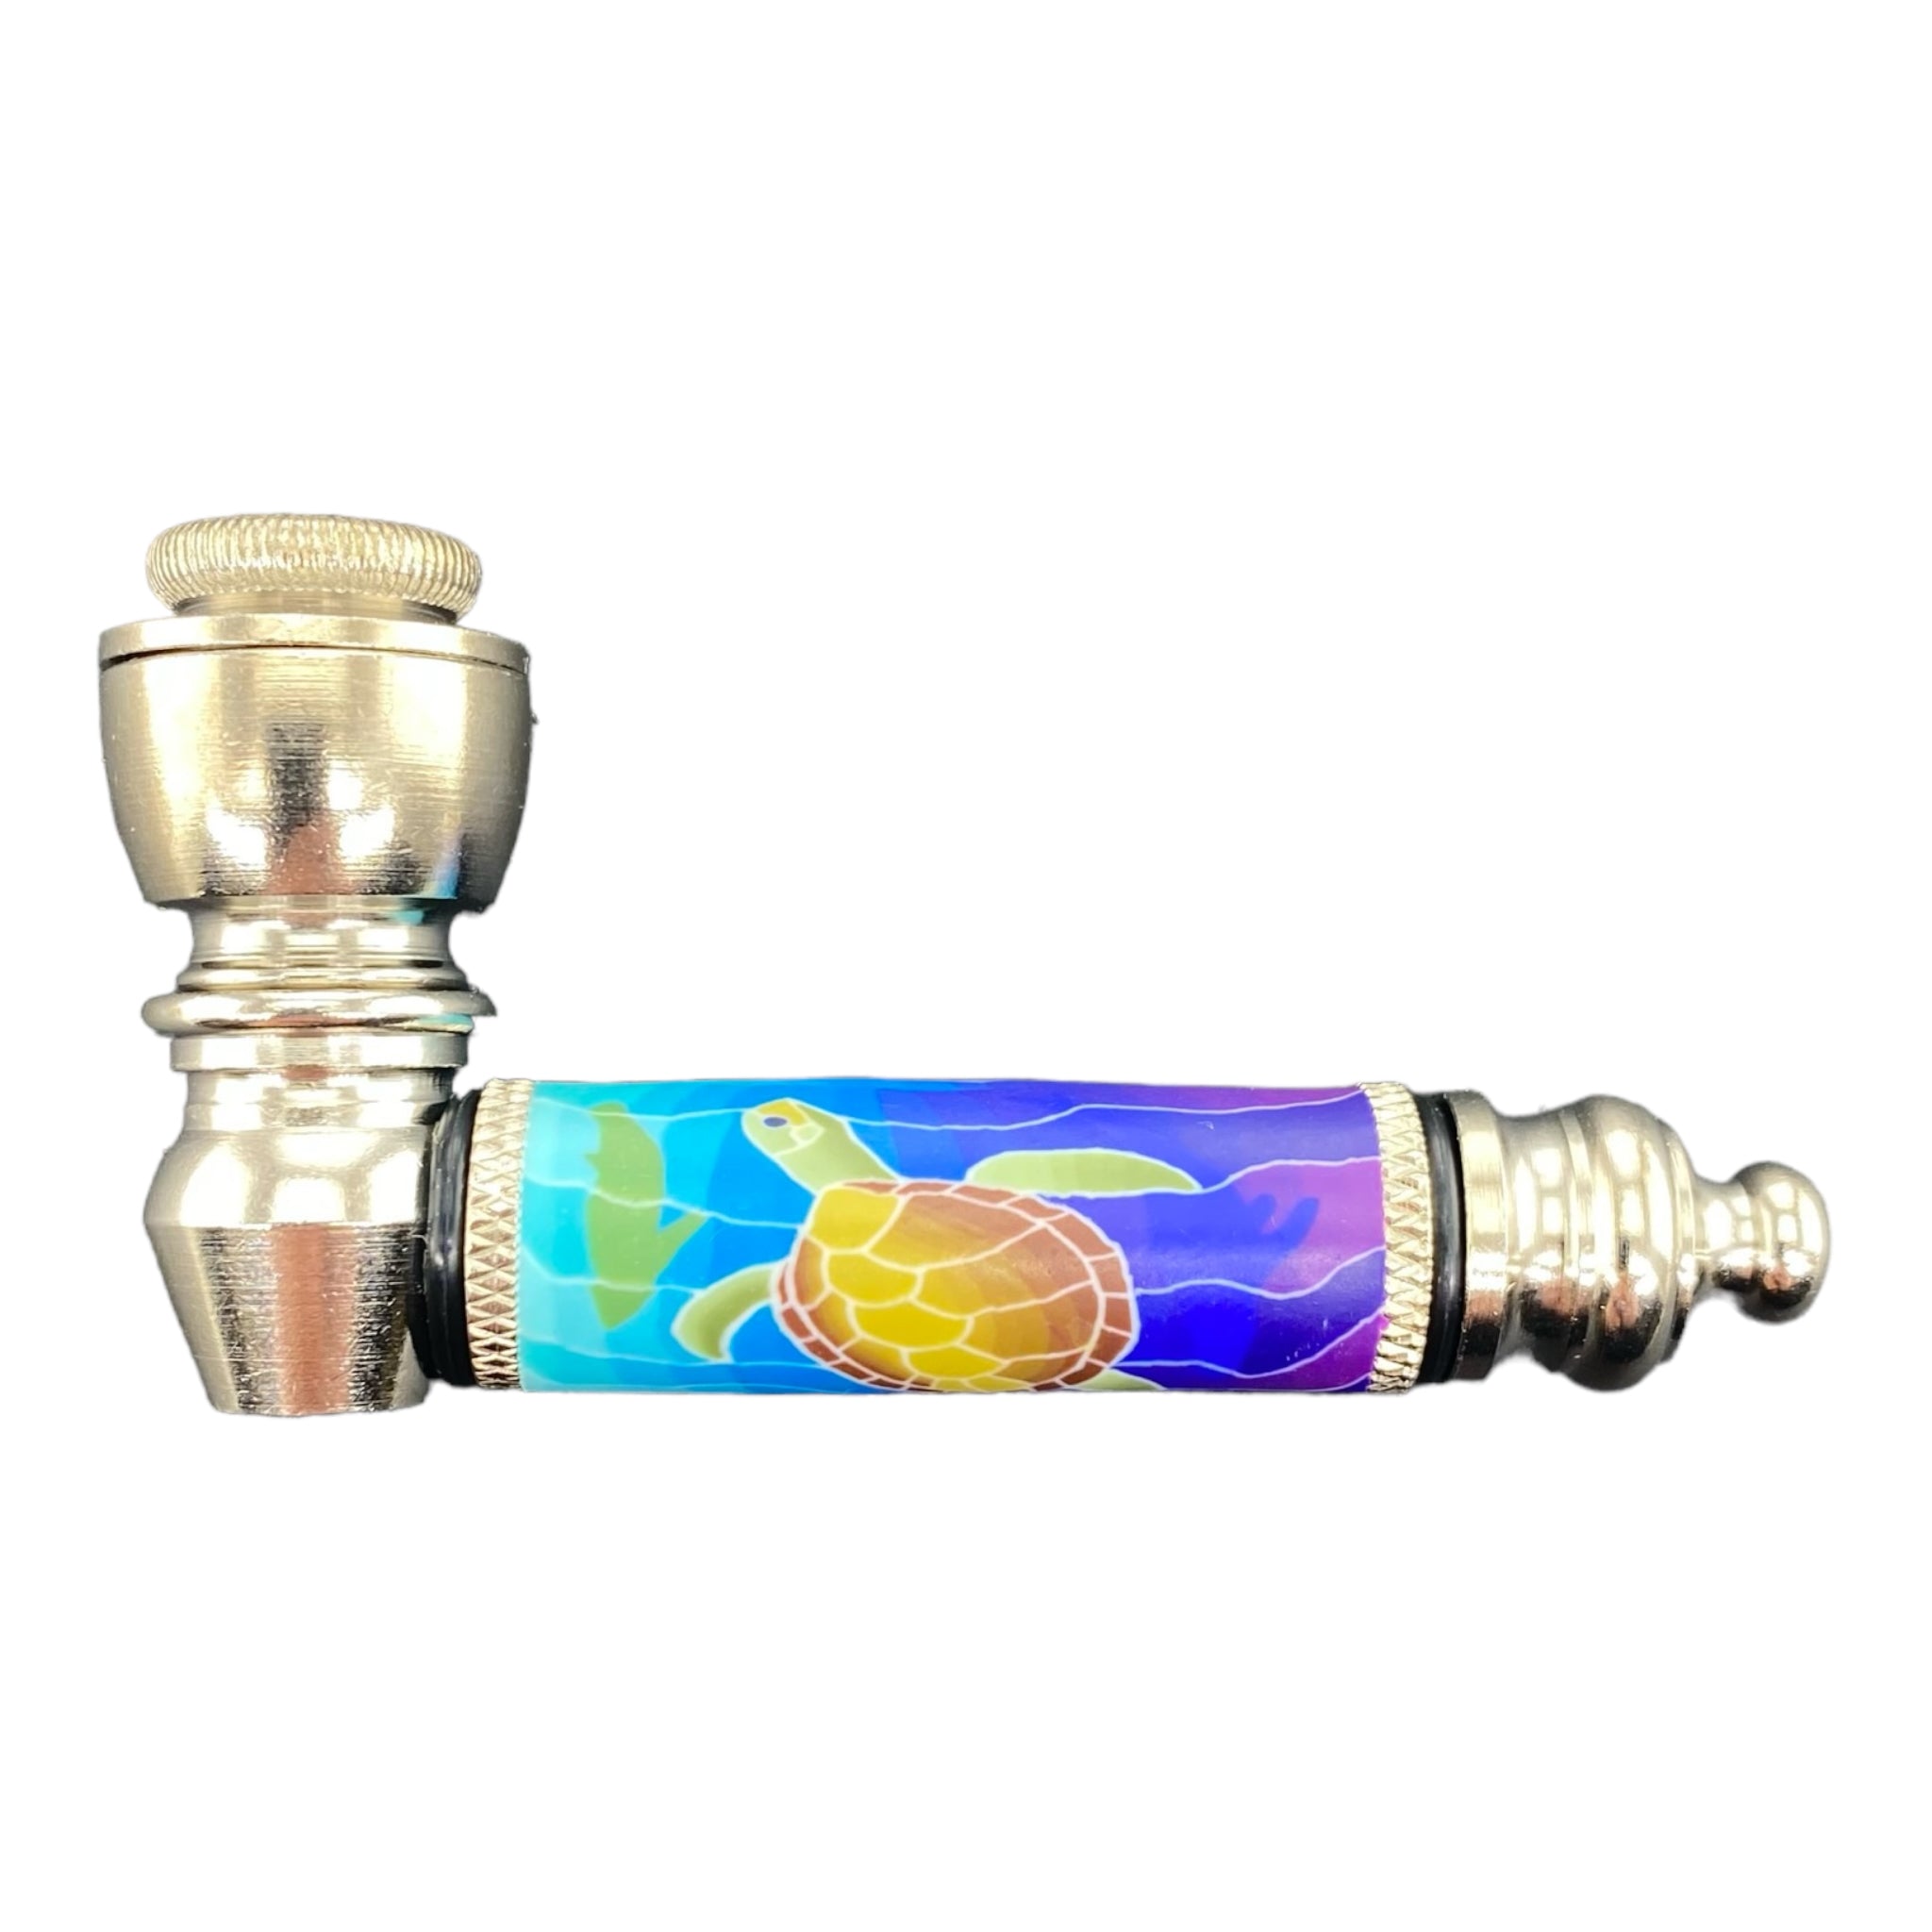 Metal Hand Pipes - Silver Chrome Hand Pipe With Sea Turtle